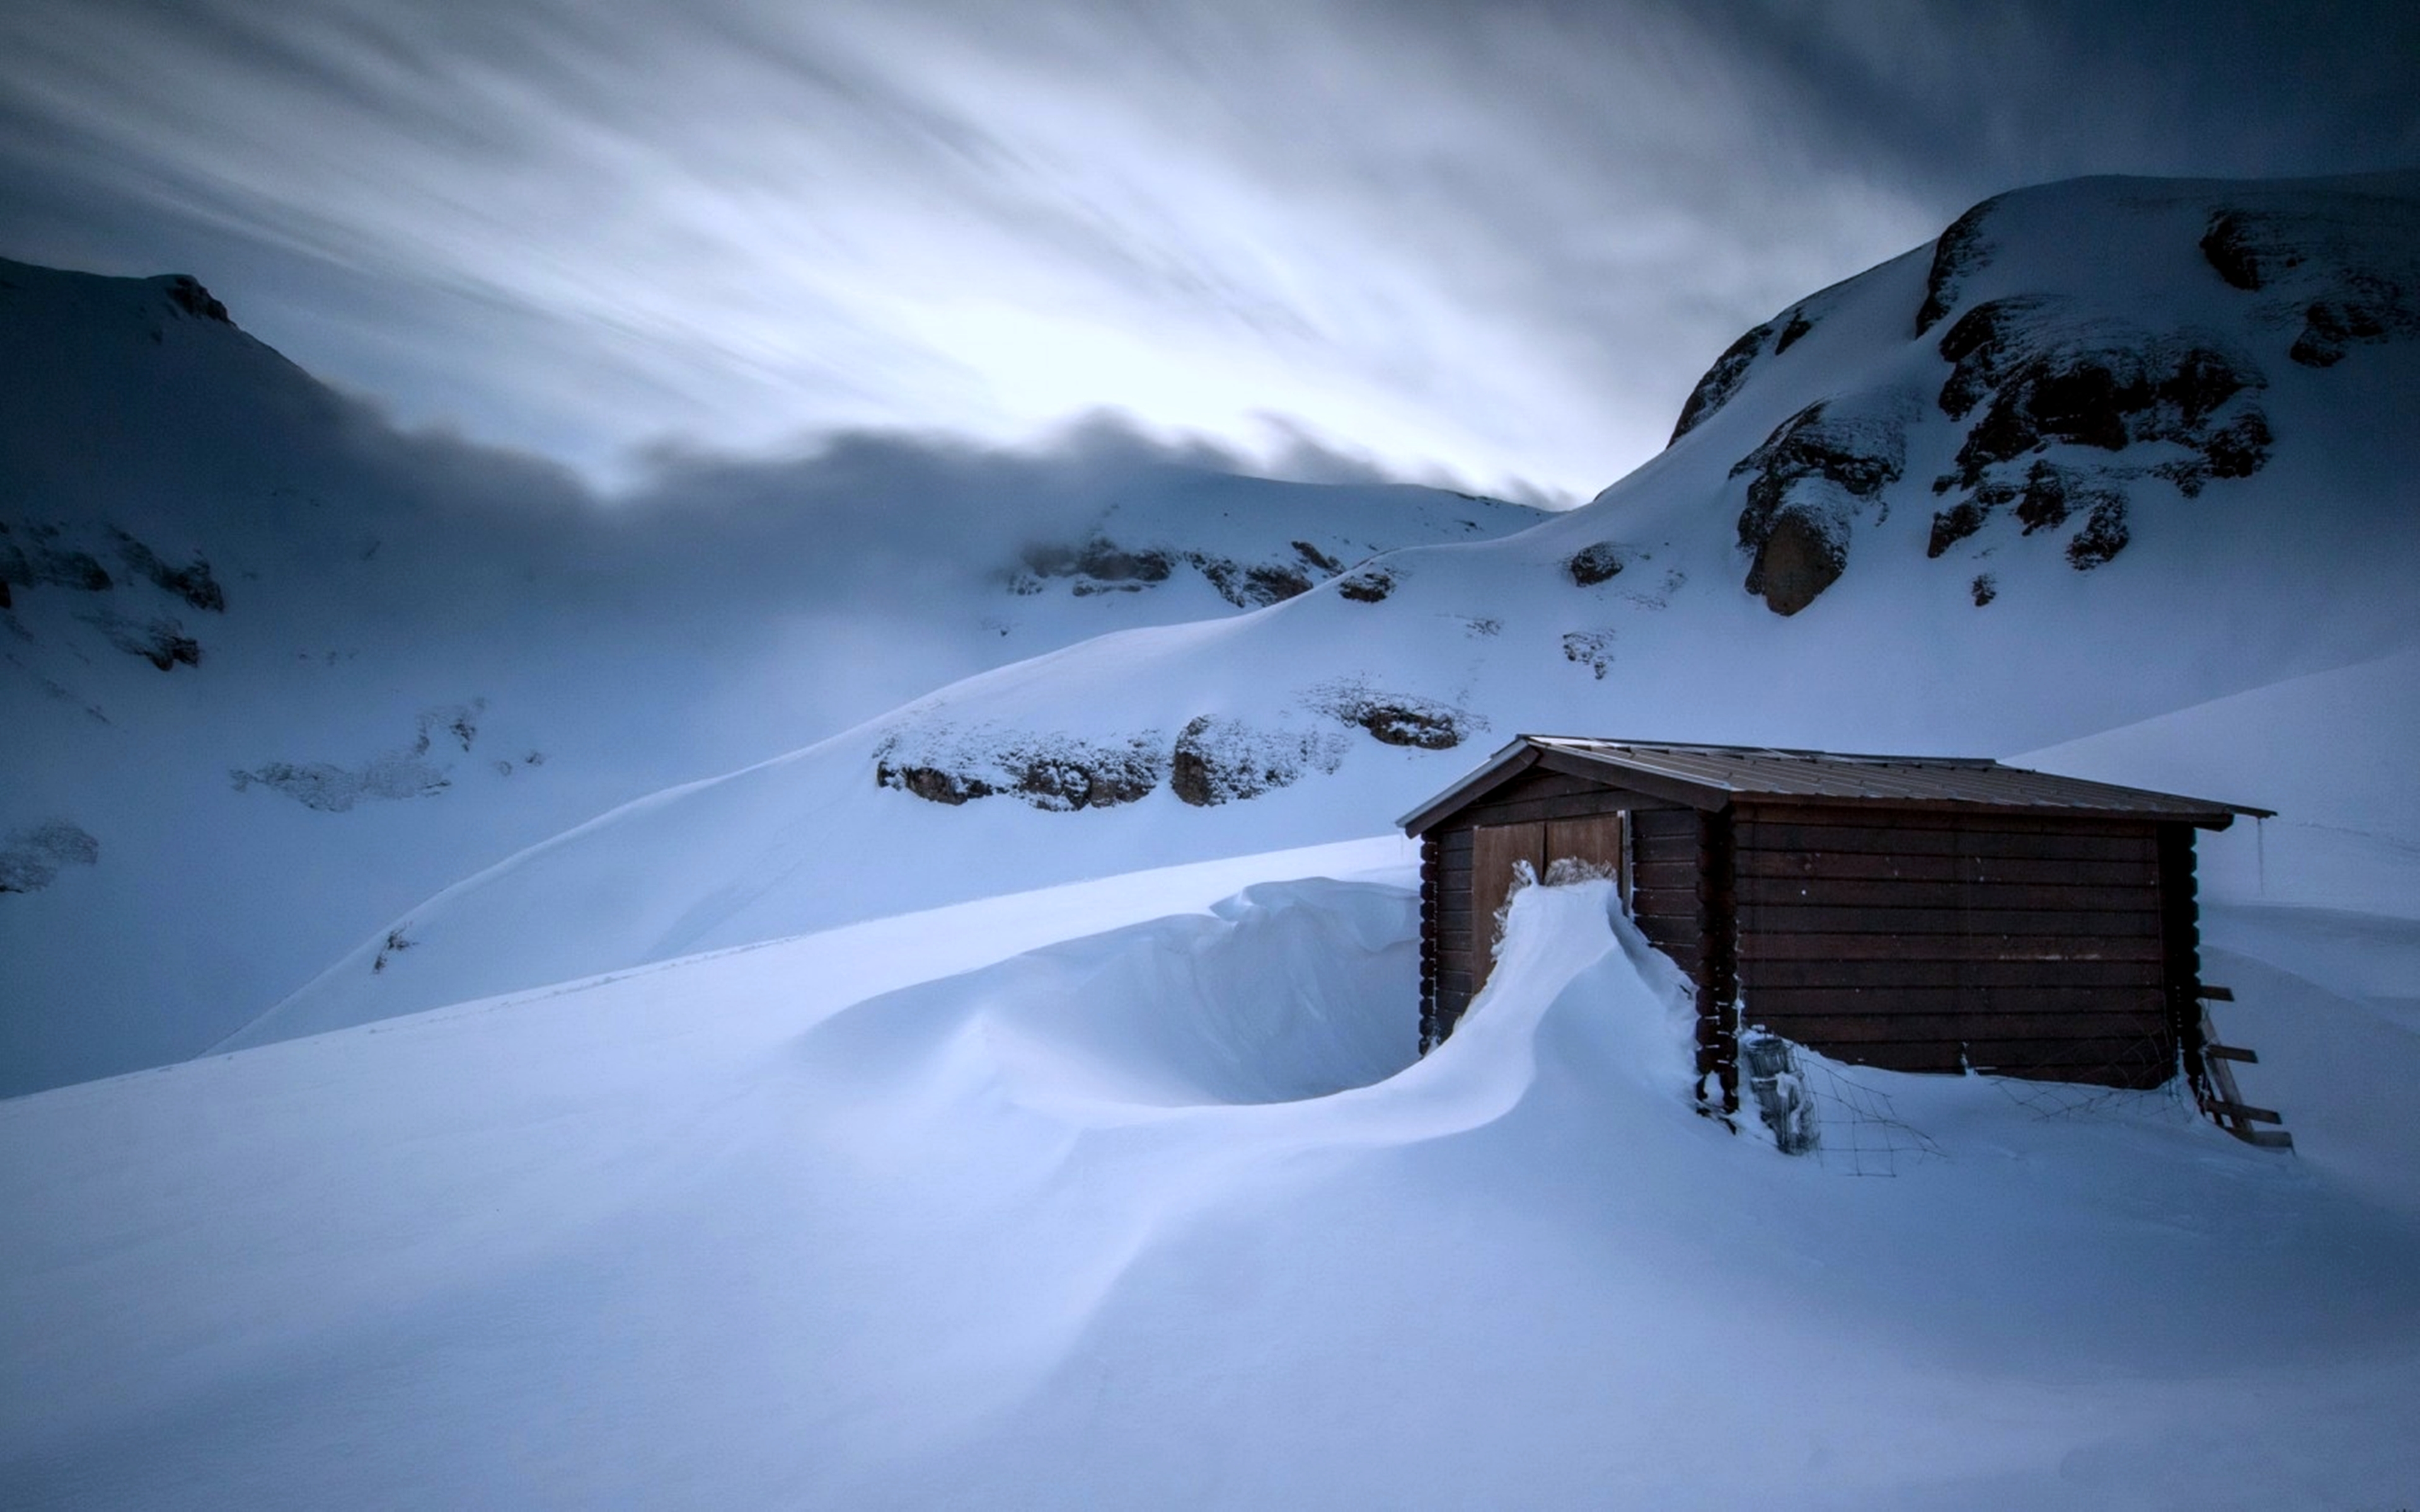 cold, white, photography, winter, house, hut, landscape, mountain, nature, snow 4K